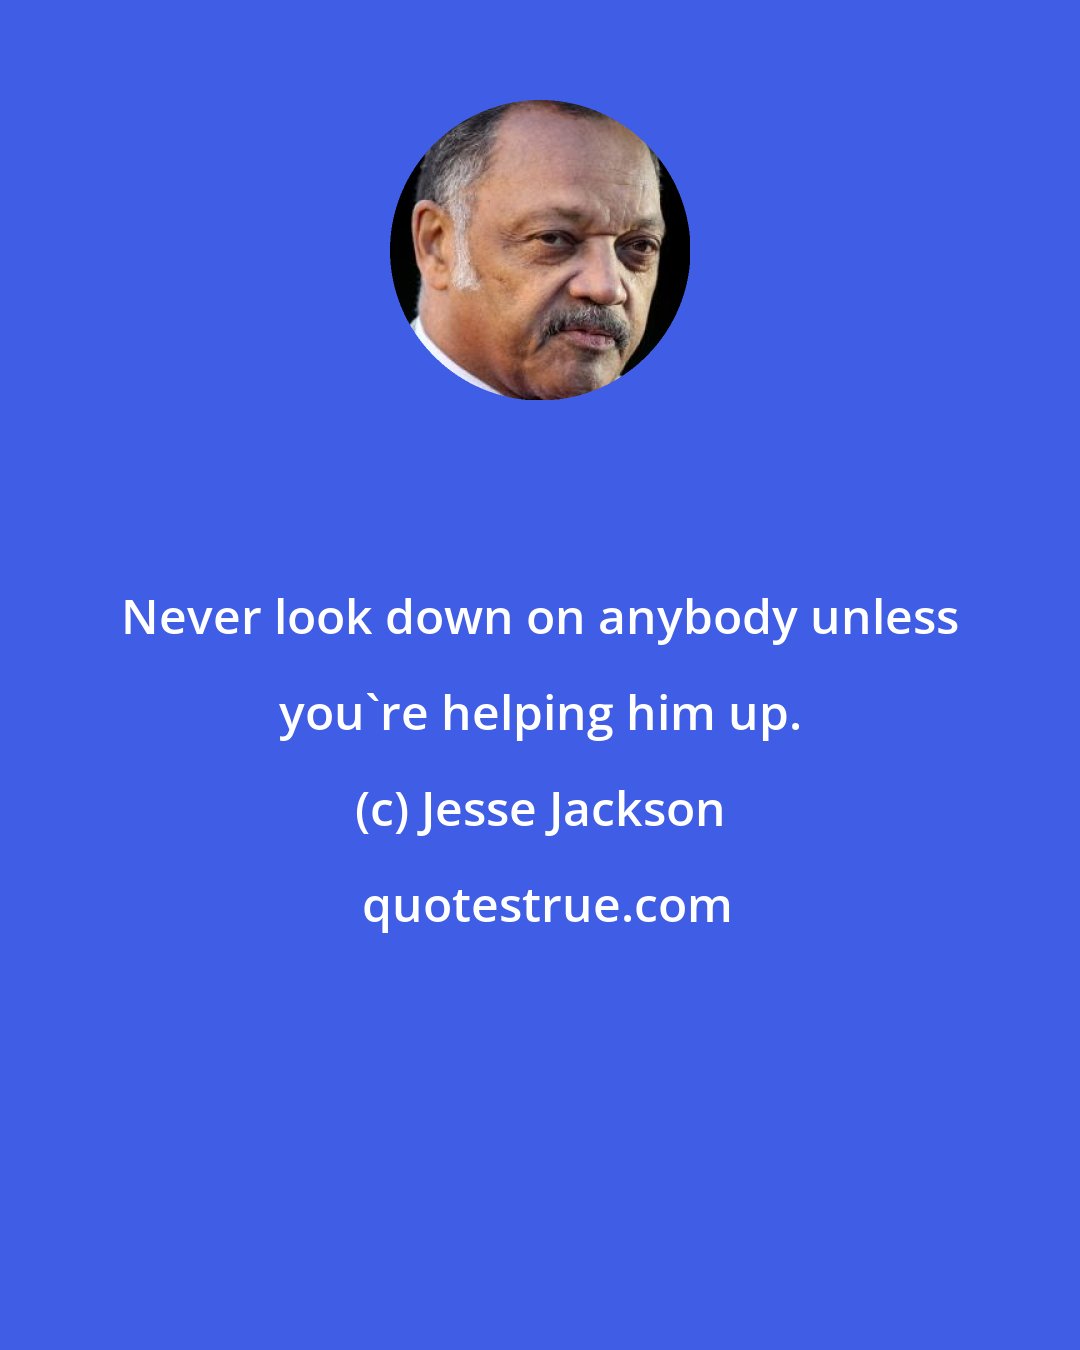 Jesse Jackson: Never look down on anybody unless you're helping him up.